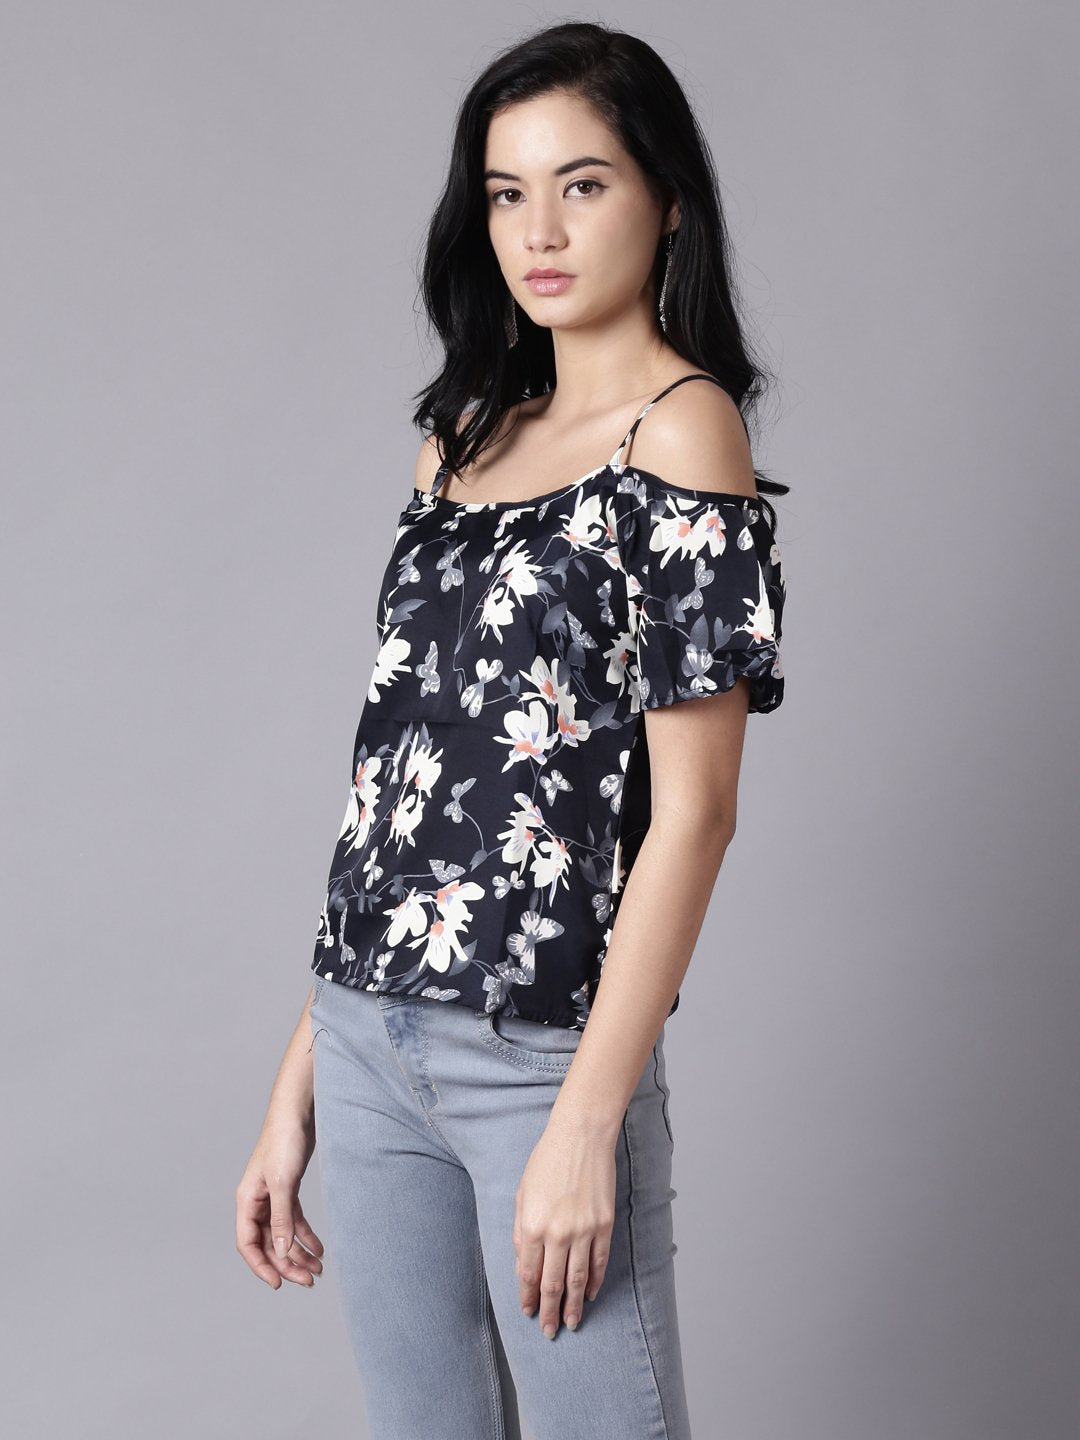 Women's Daima Navy Blue Casual Printed Shoulder Straps Top - Nayo Clothing